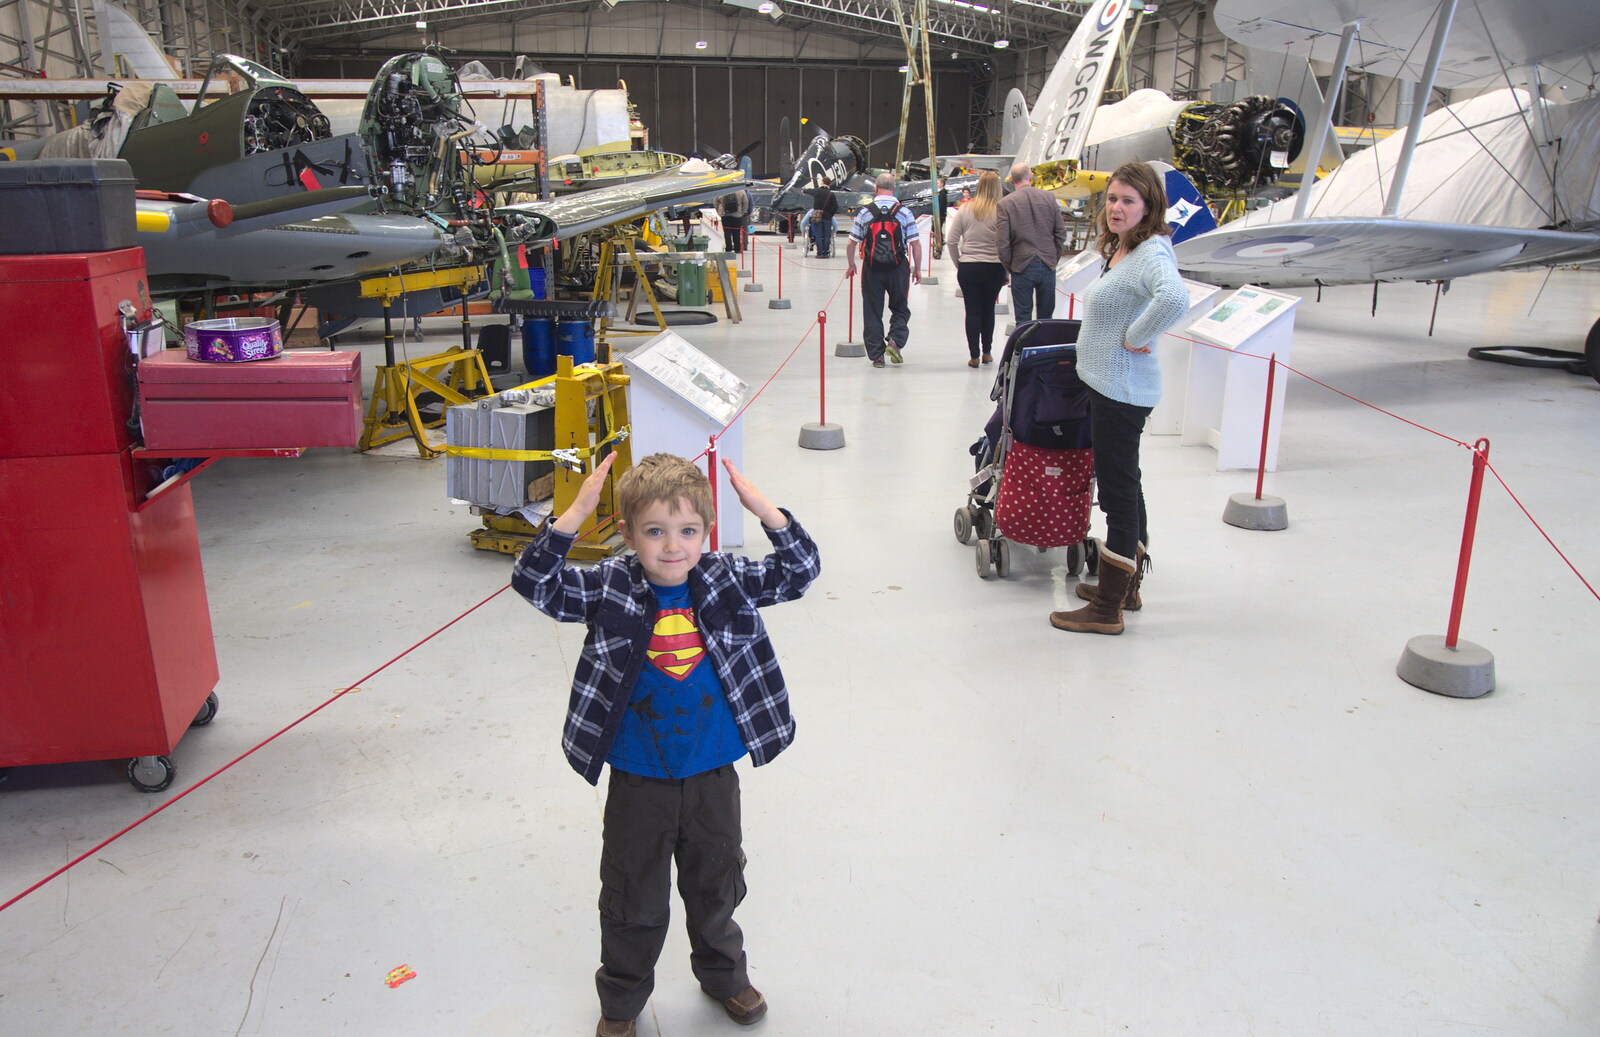 Fred in the working aircraft hangar from A Day Out at Duxford, Cambridgeshire - 9th March 2014